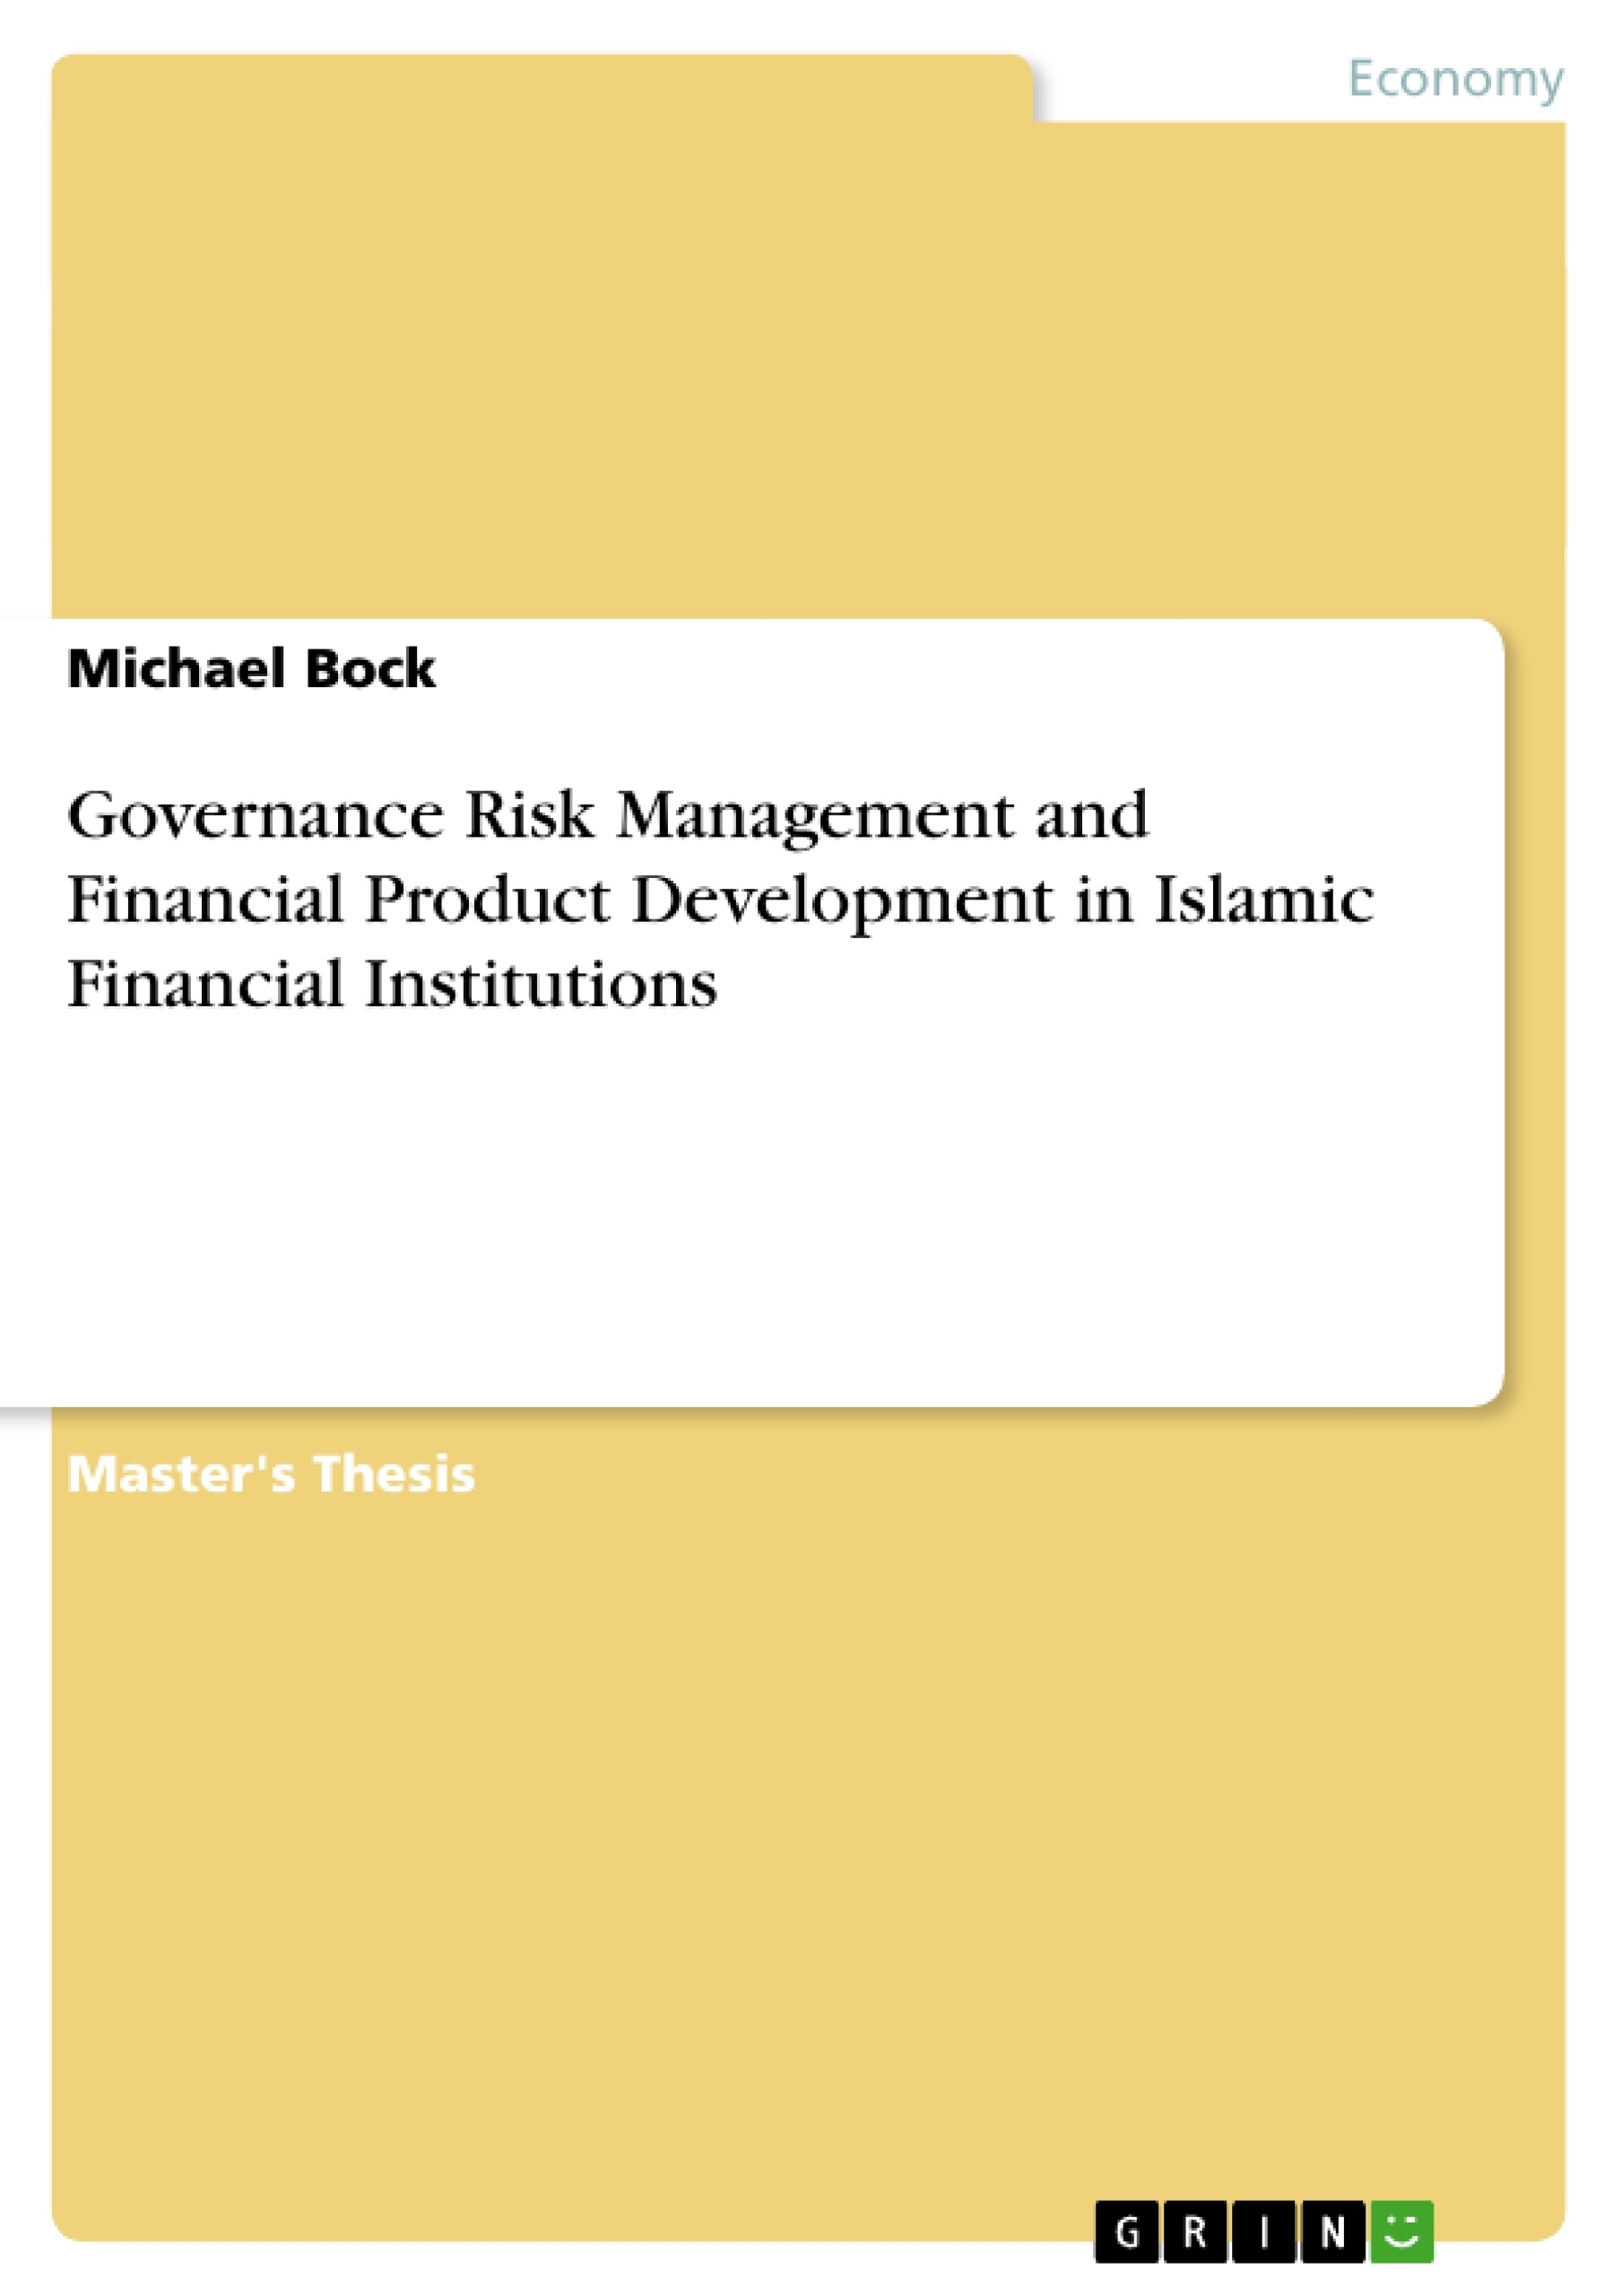 Title: Governance Risk Management and Financial Product Development in Islamic Financial Institutions